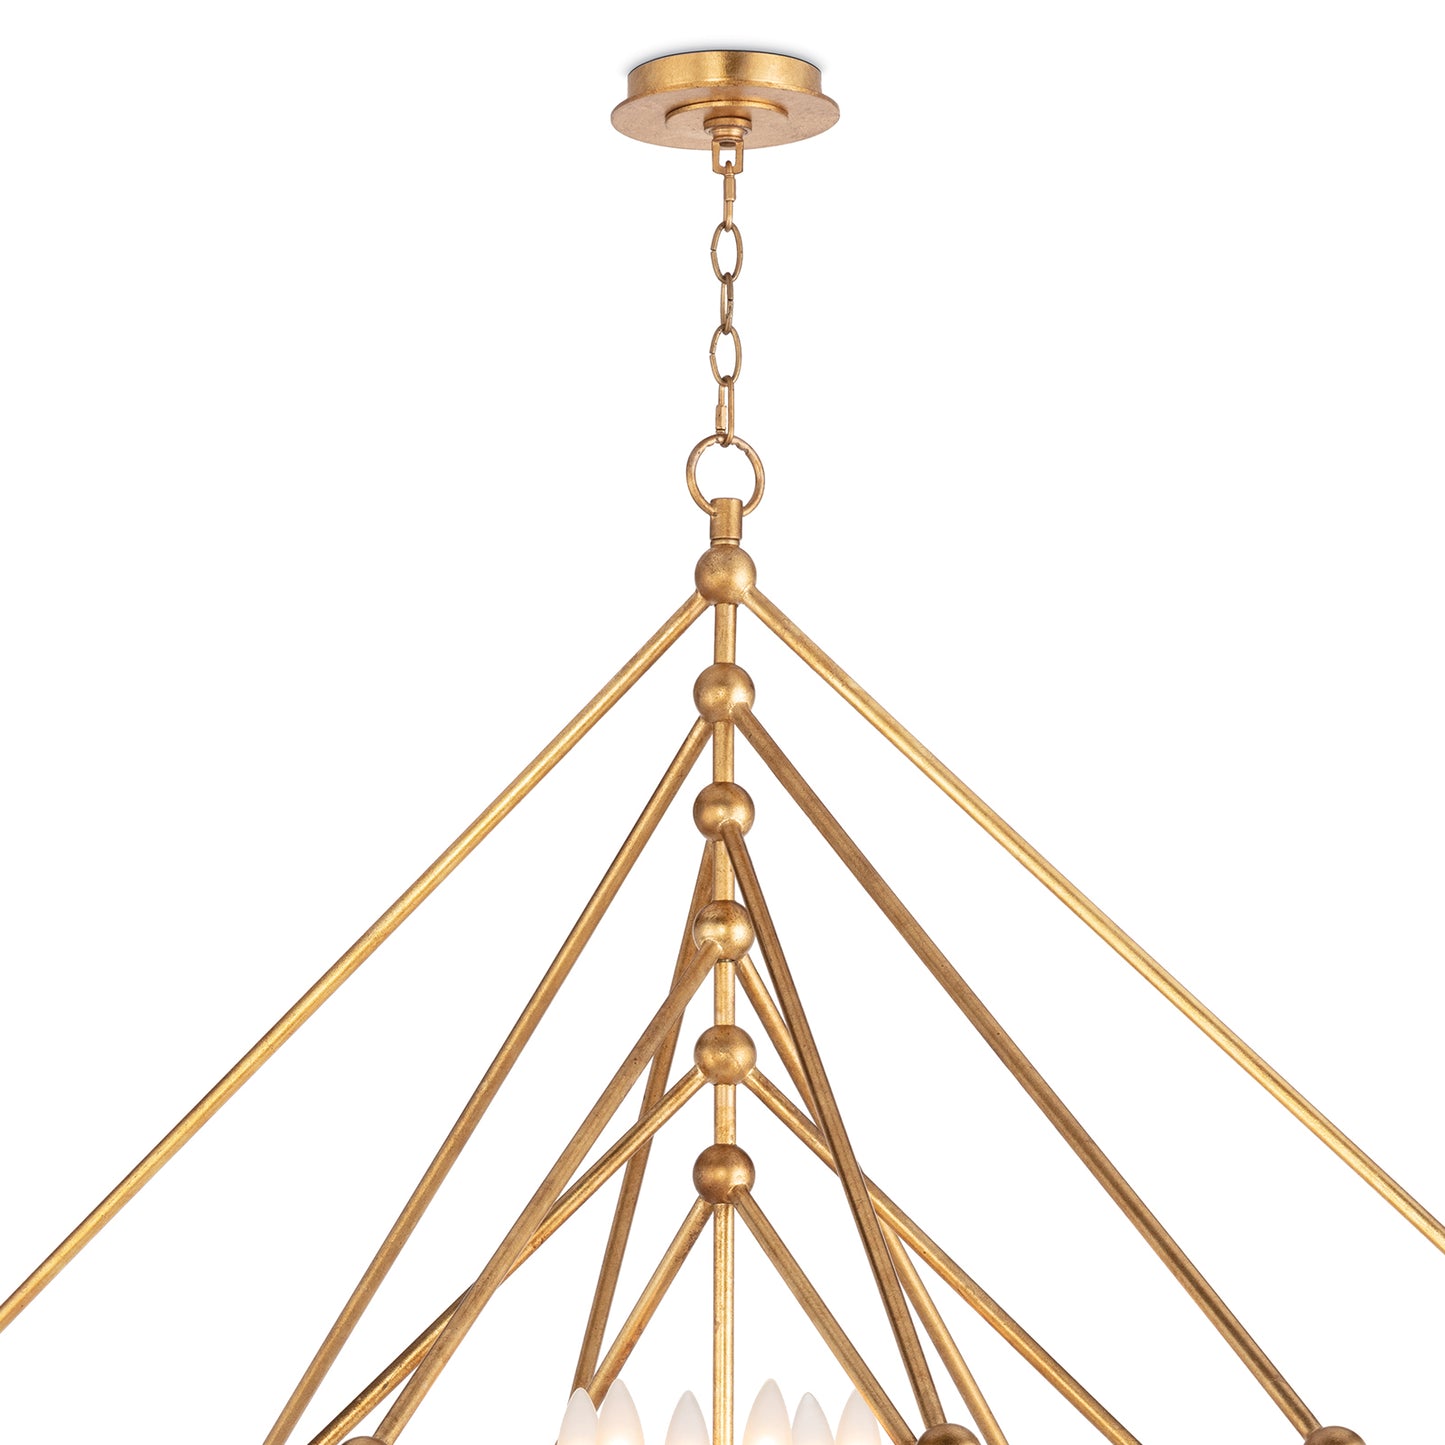 Selena Chandelier Square Large by Southern Living